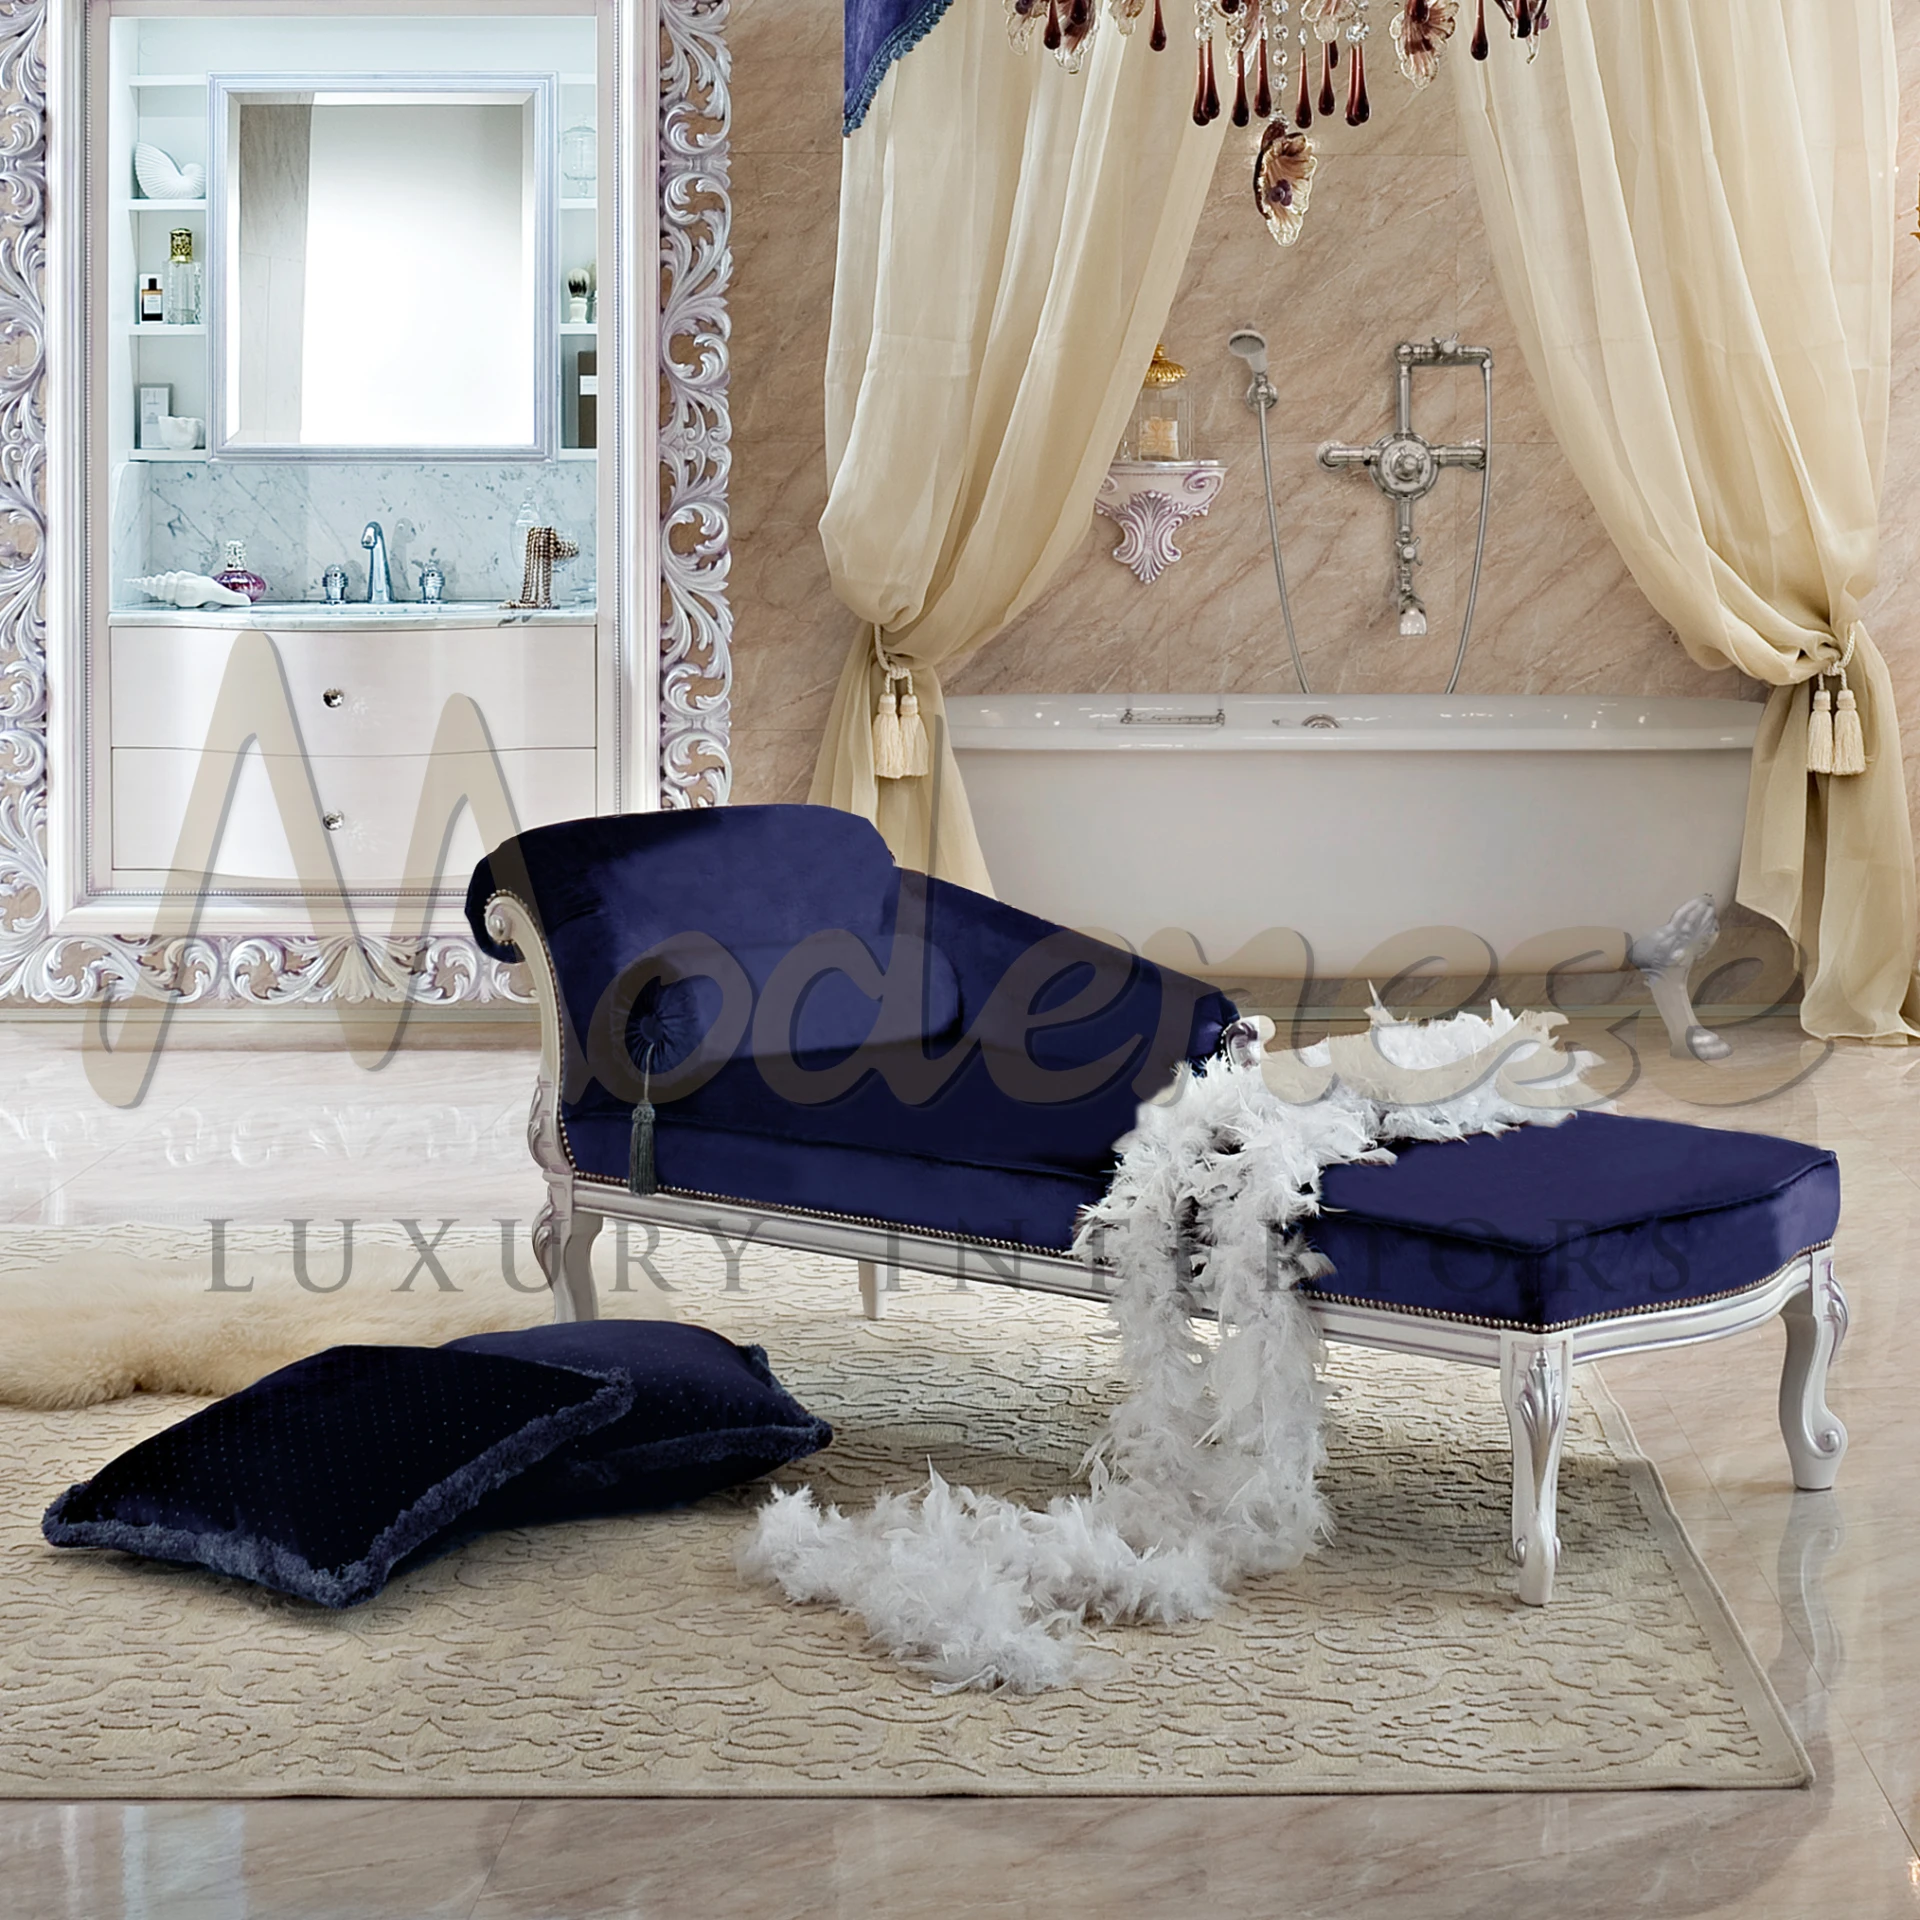 Classic chaise lounge with deep blue upholstery and intricate frame design.                                                                                      